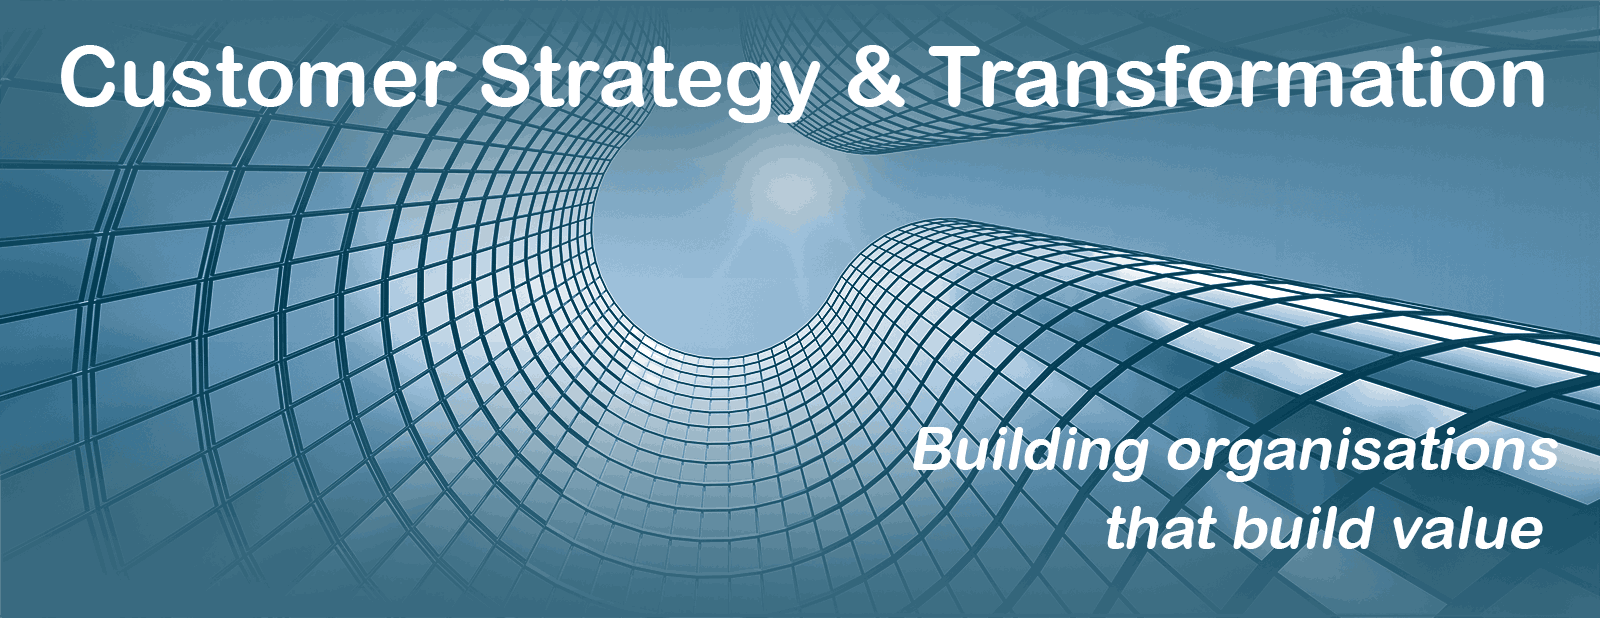 Customer Strategy & Transformation - Building organisations that build value